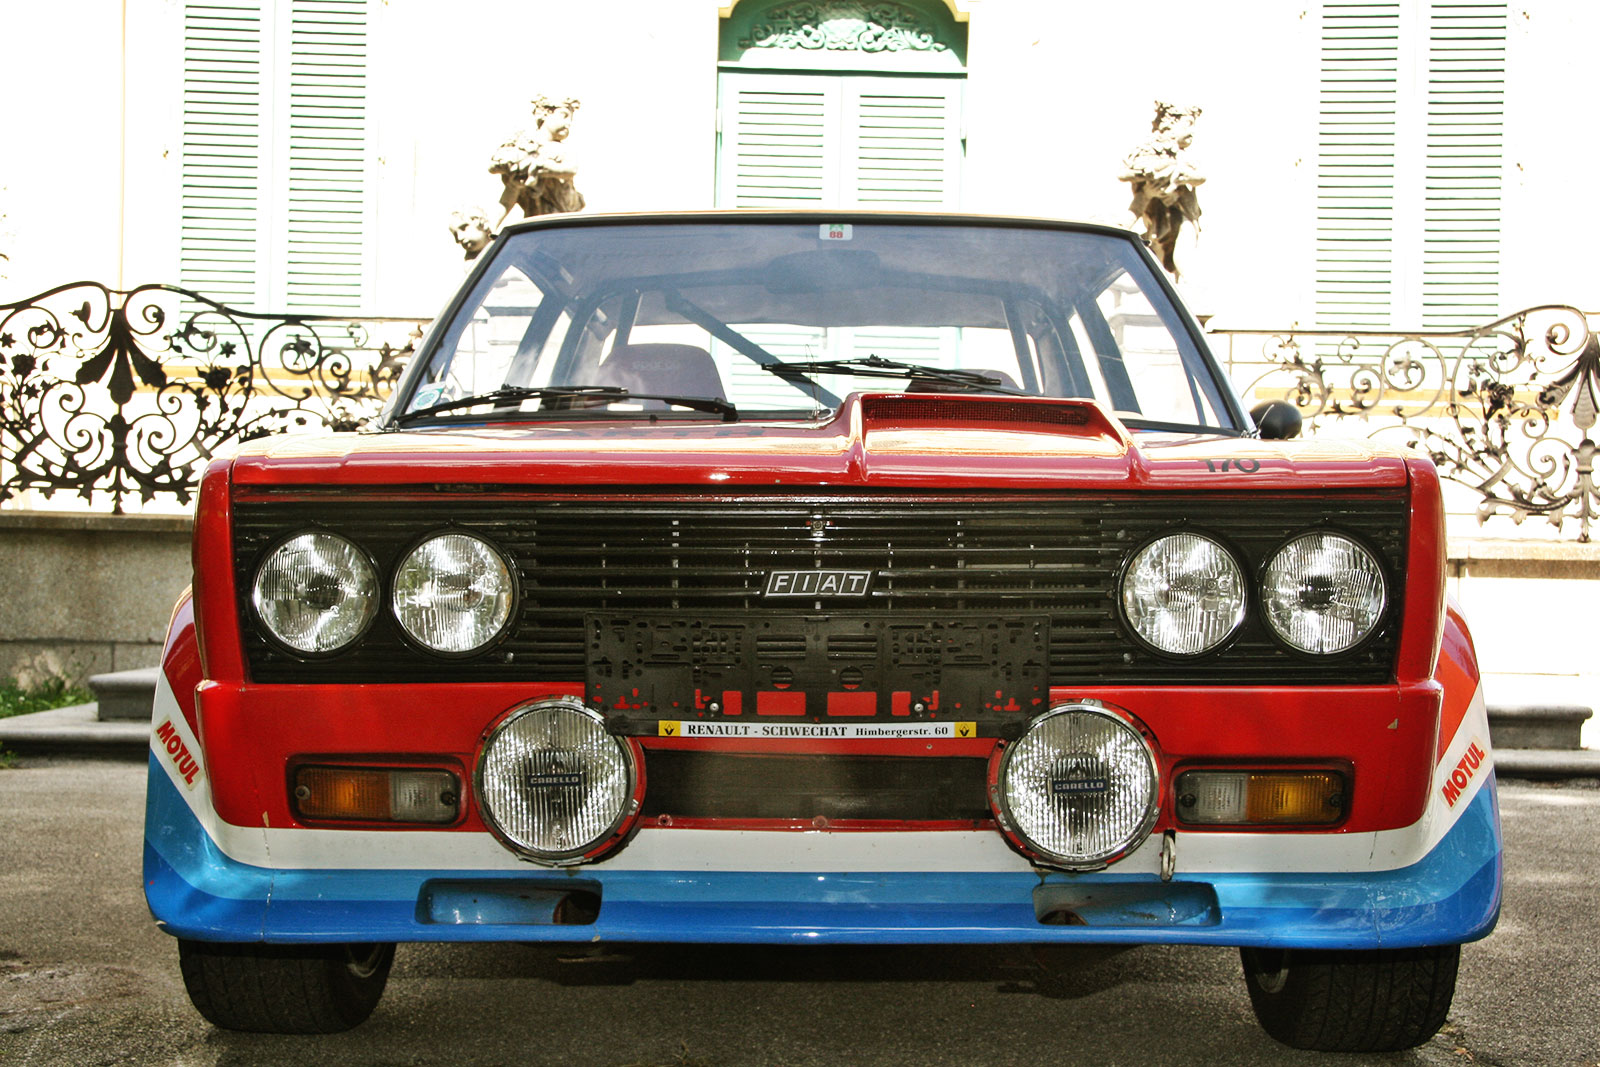 Fiat 131 Abarth - the schwab collection